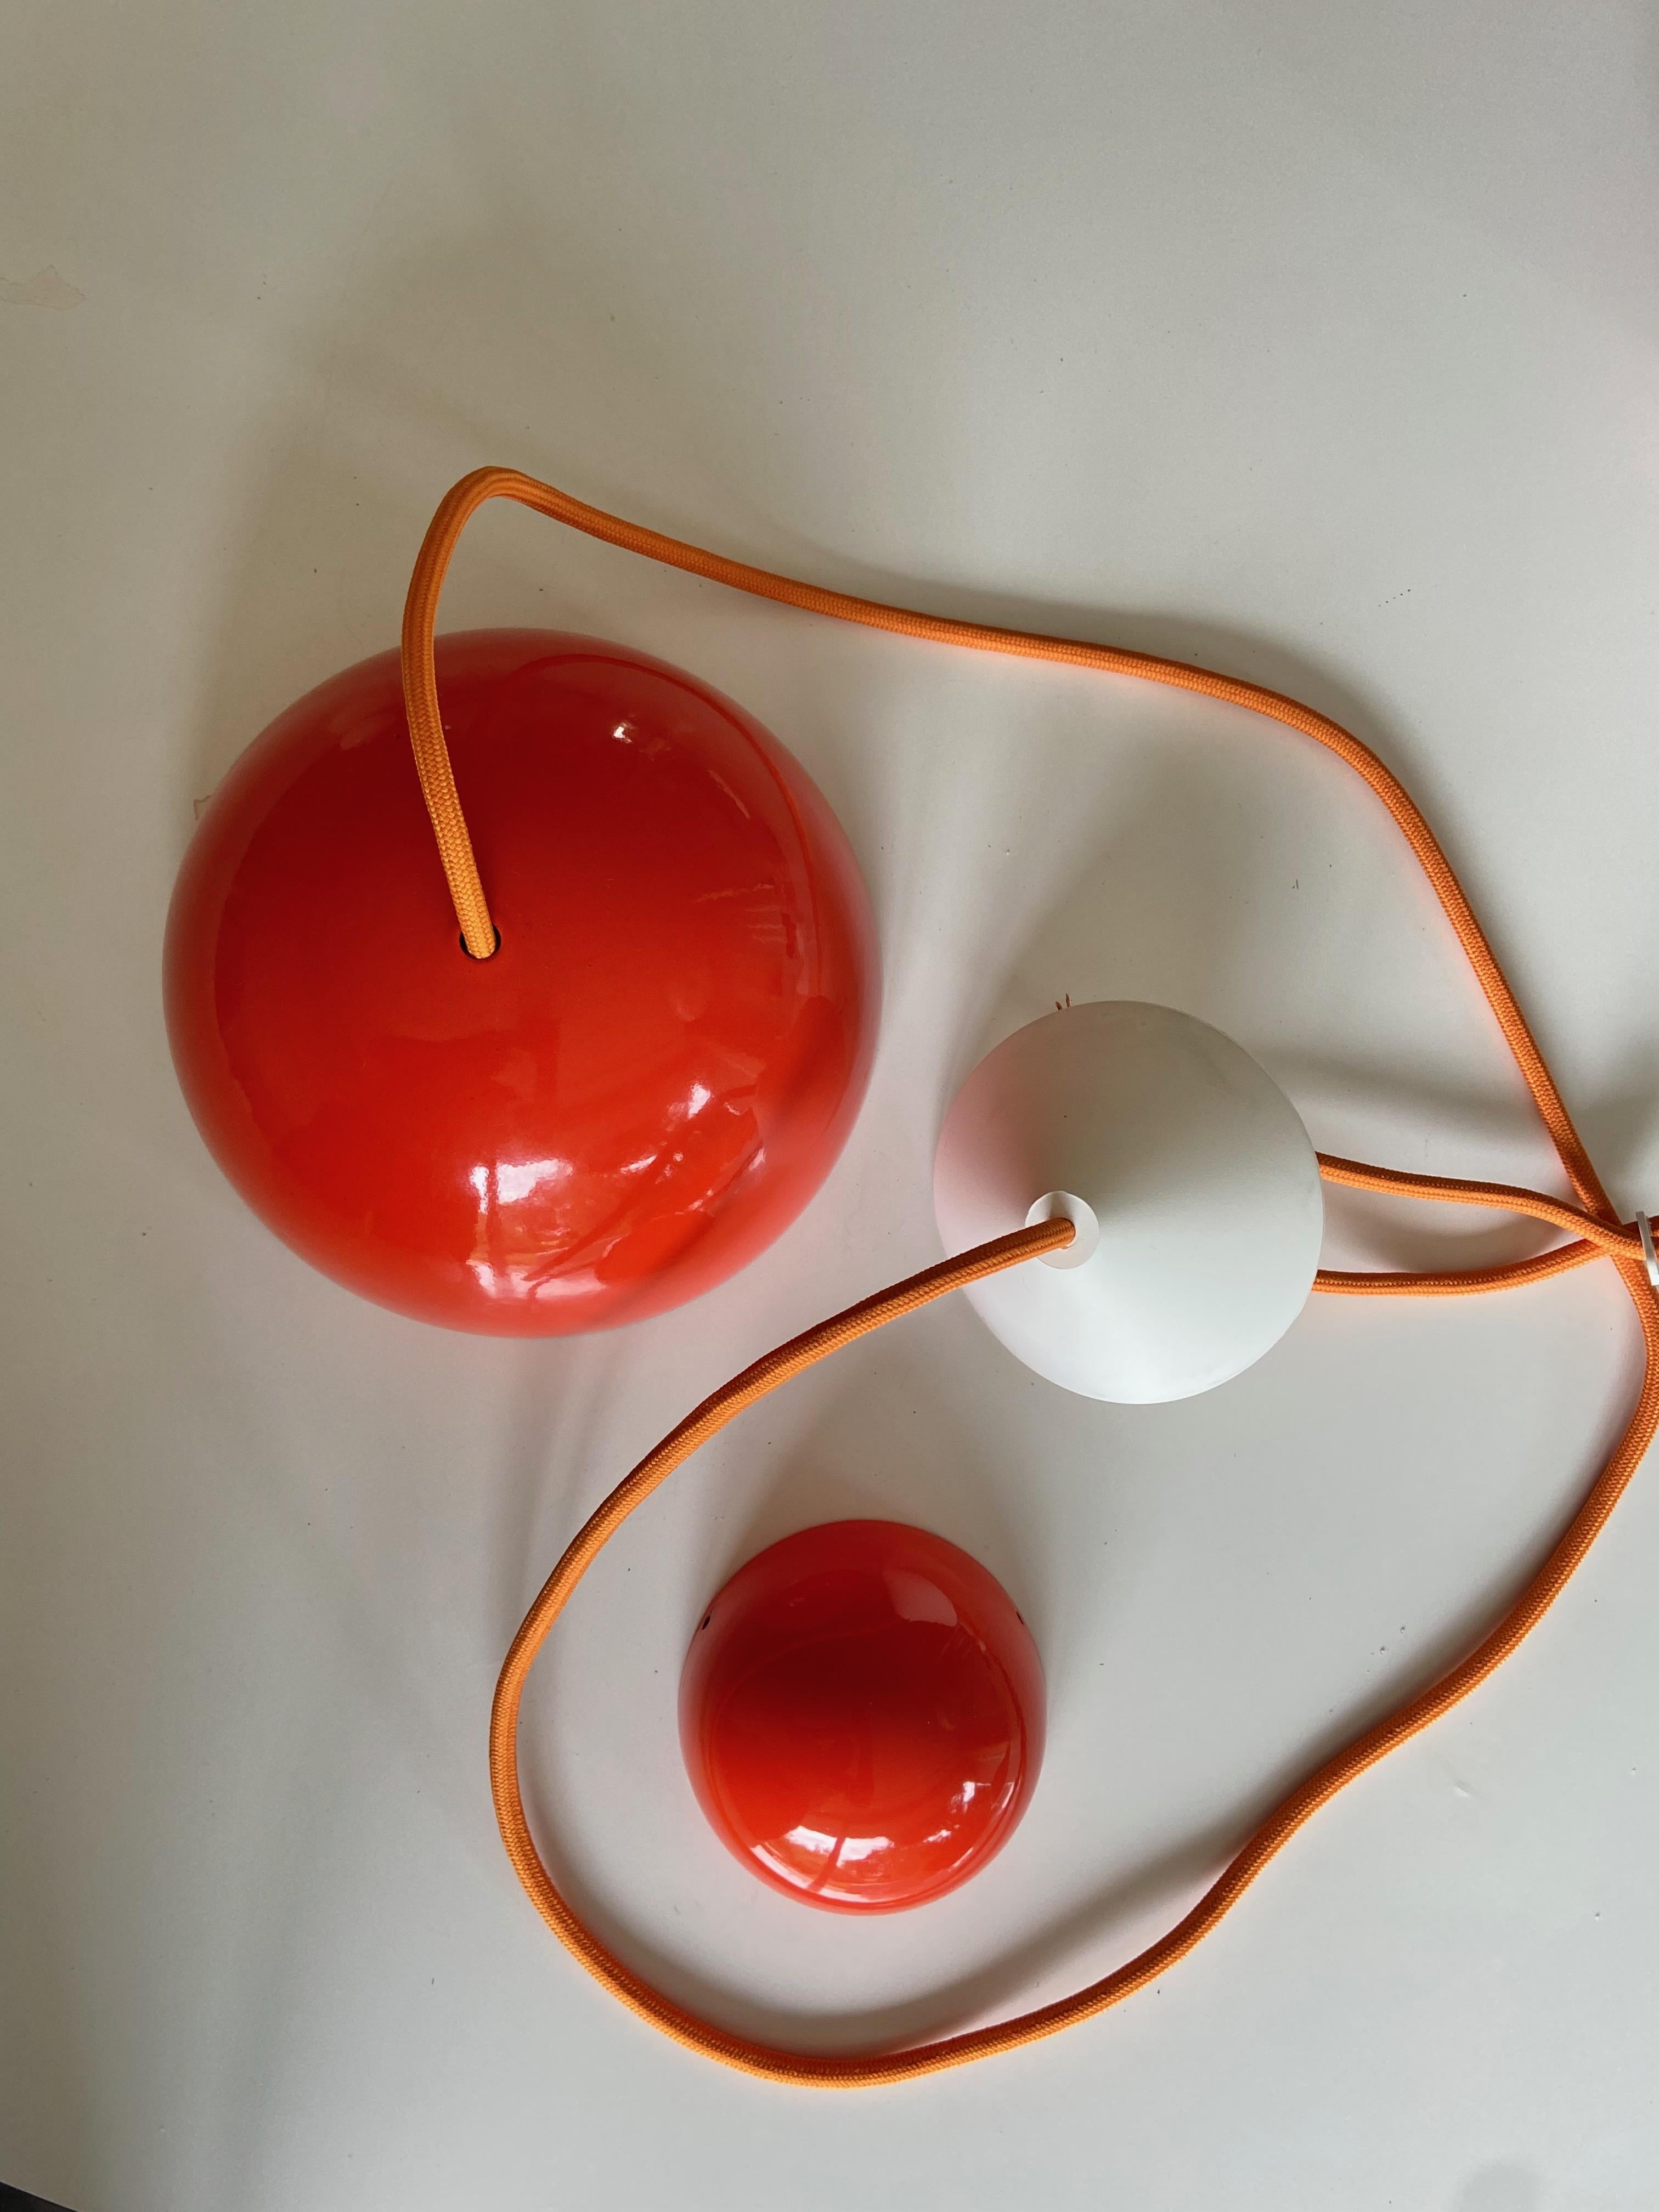 Very nice red enamel flowerpot pendant lamp design Verner Panton in 1968 produced by Louis Poulsen, Made in Denmark. In enameled metal no more in production. The lamp is in good condition. No parts missing, with new orange fabric electric cord if